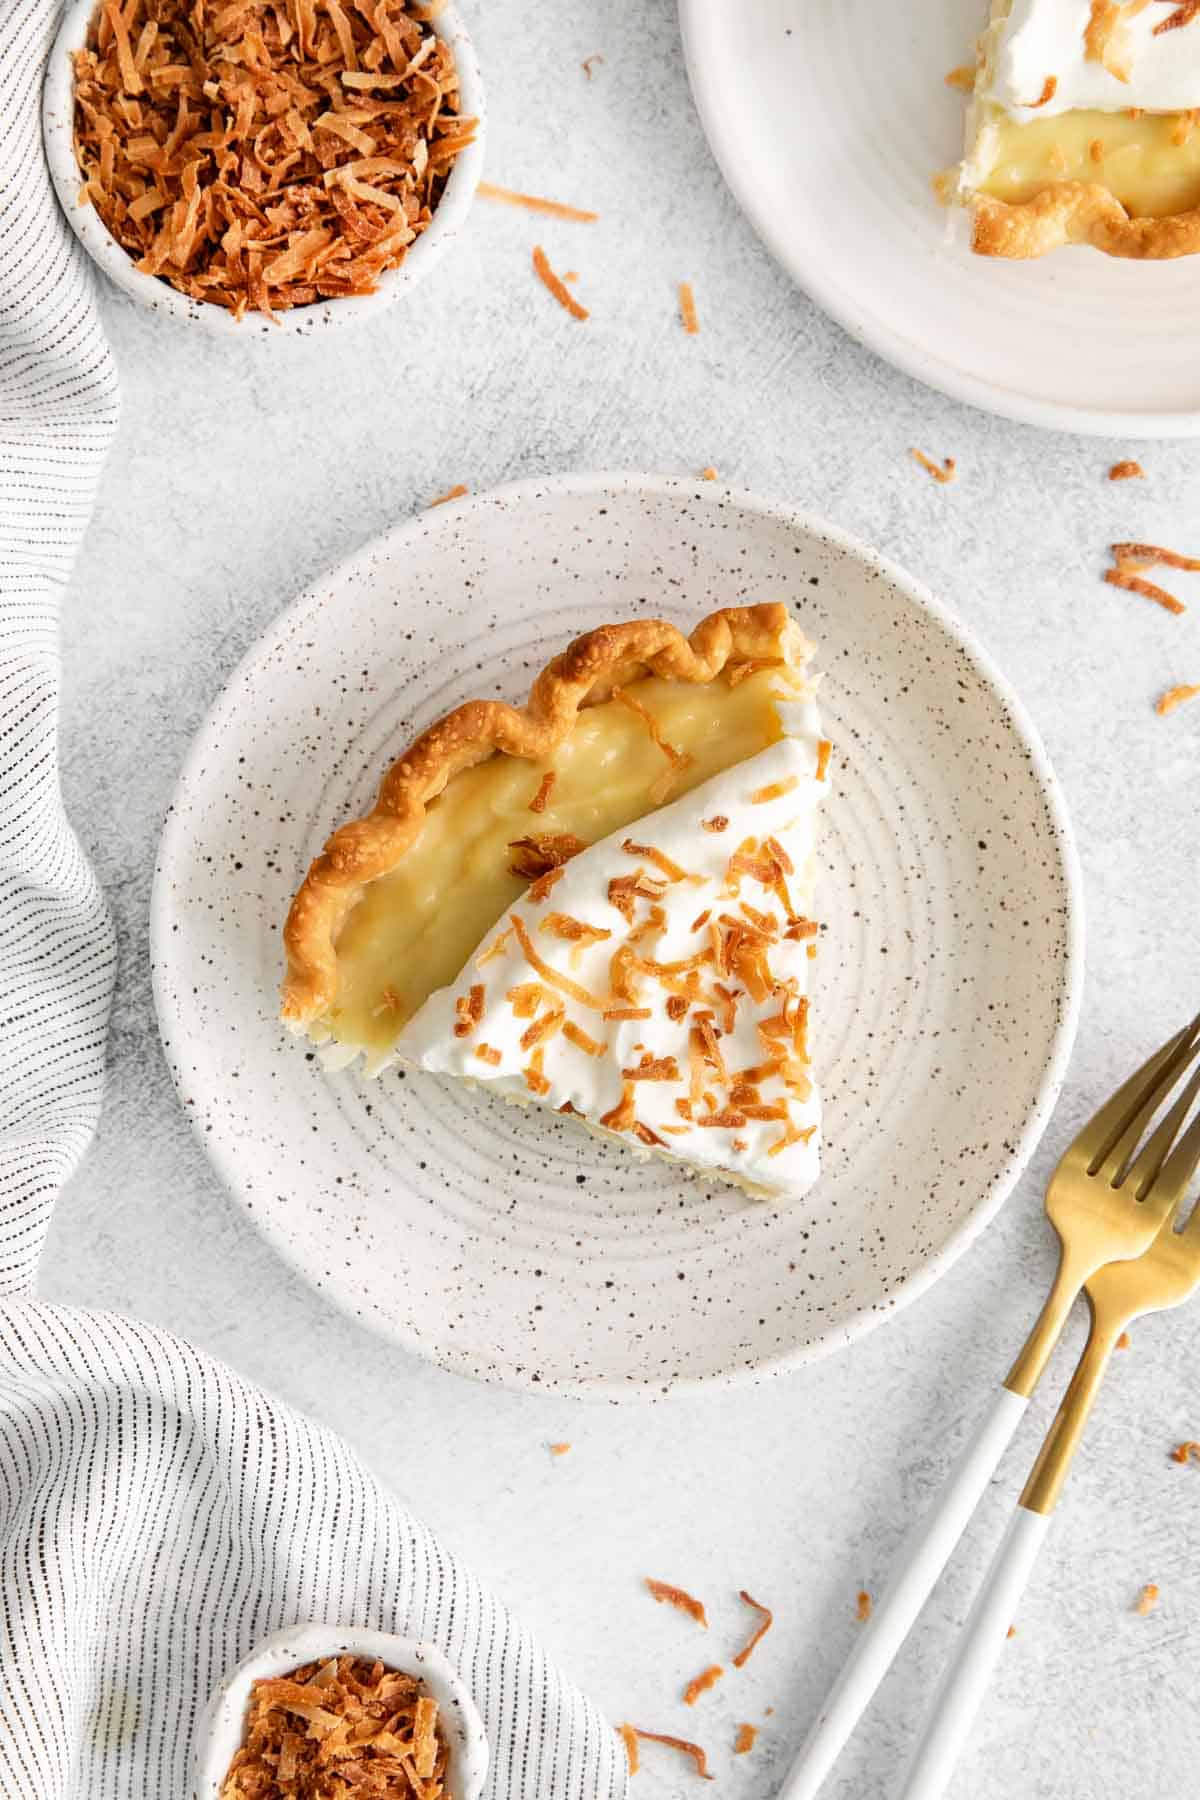 An overhead look at a slice of coconut cream pie on a plate